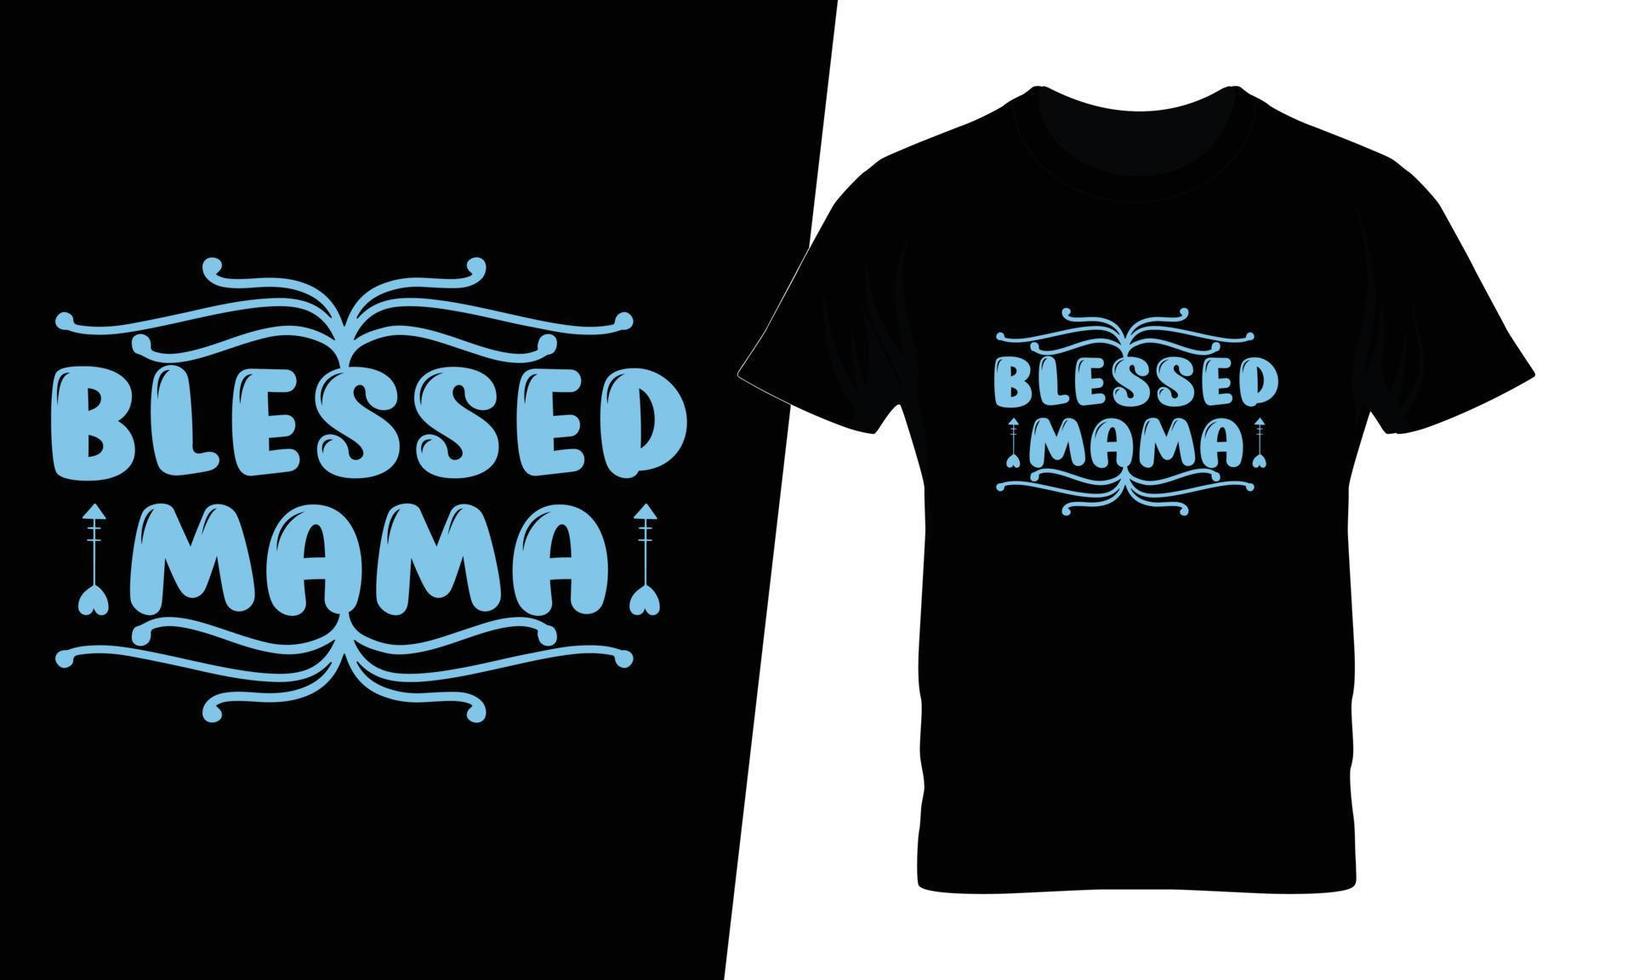 Blessed mama typography t shirt design vector